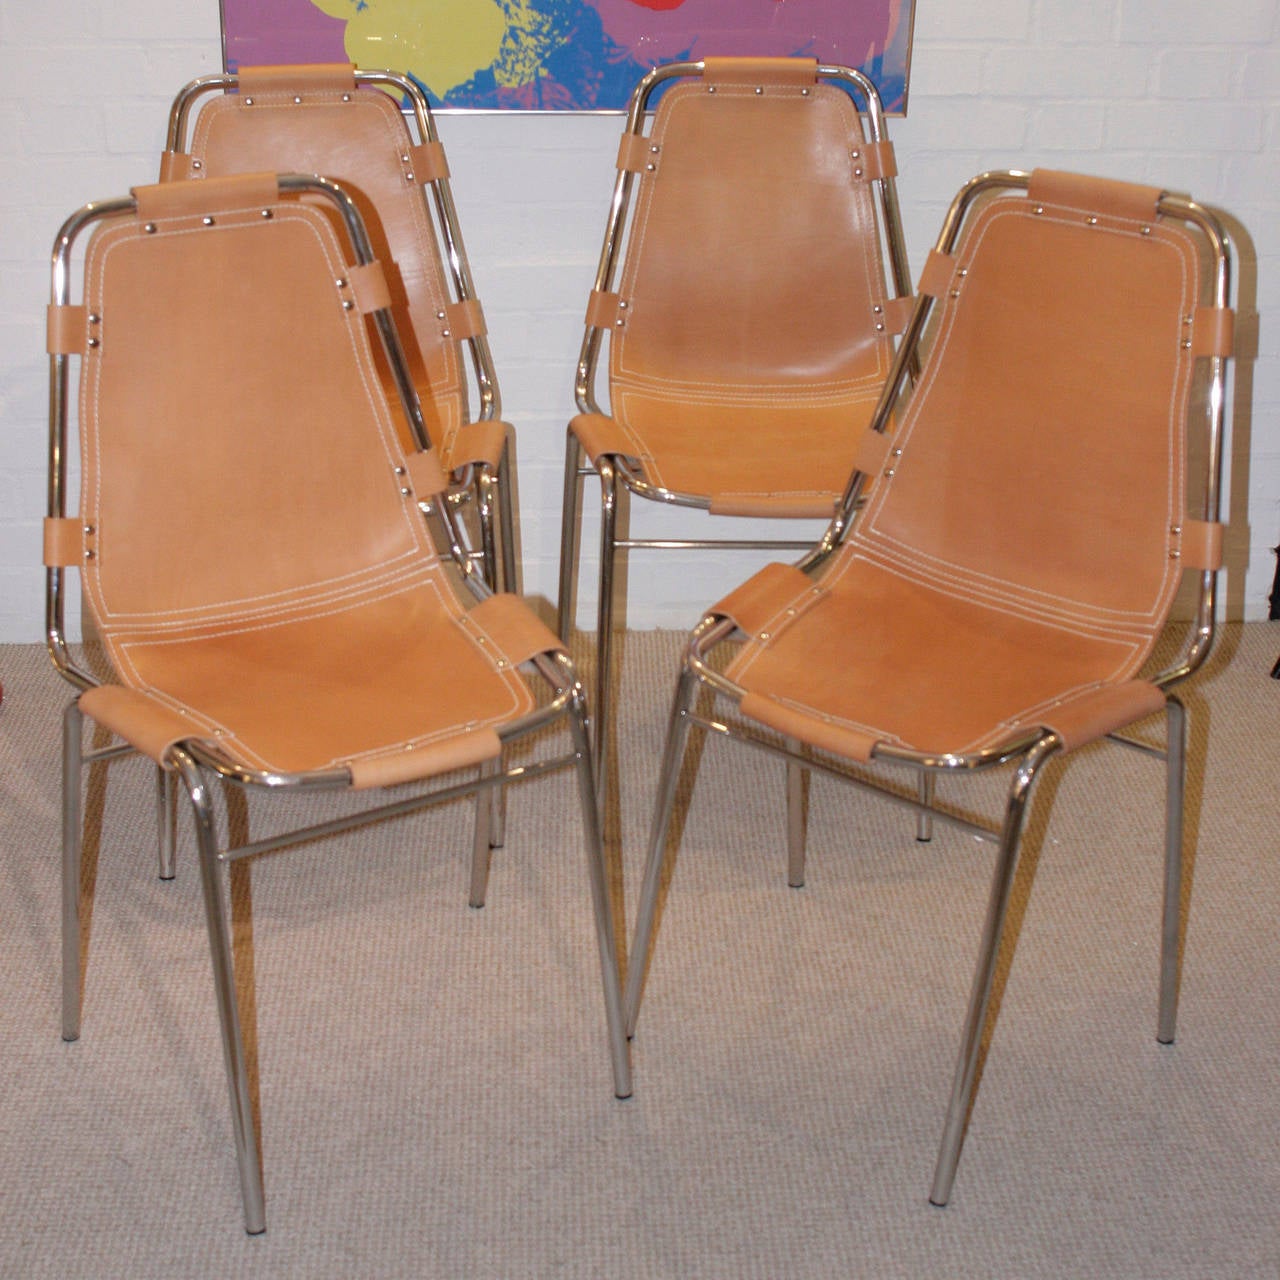 Brown leather upholstery on chrome structure, France, 1970s.